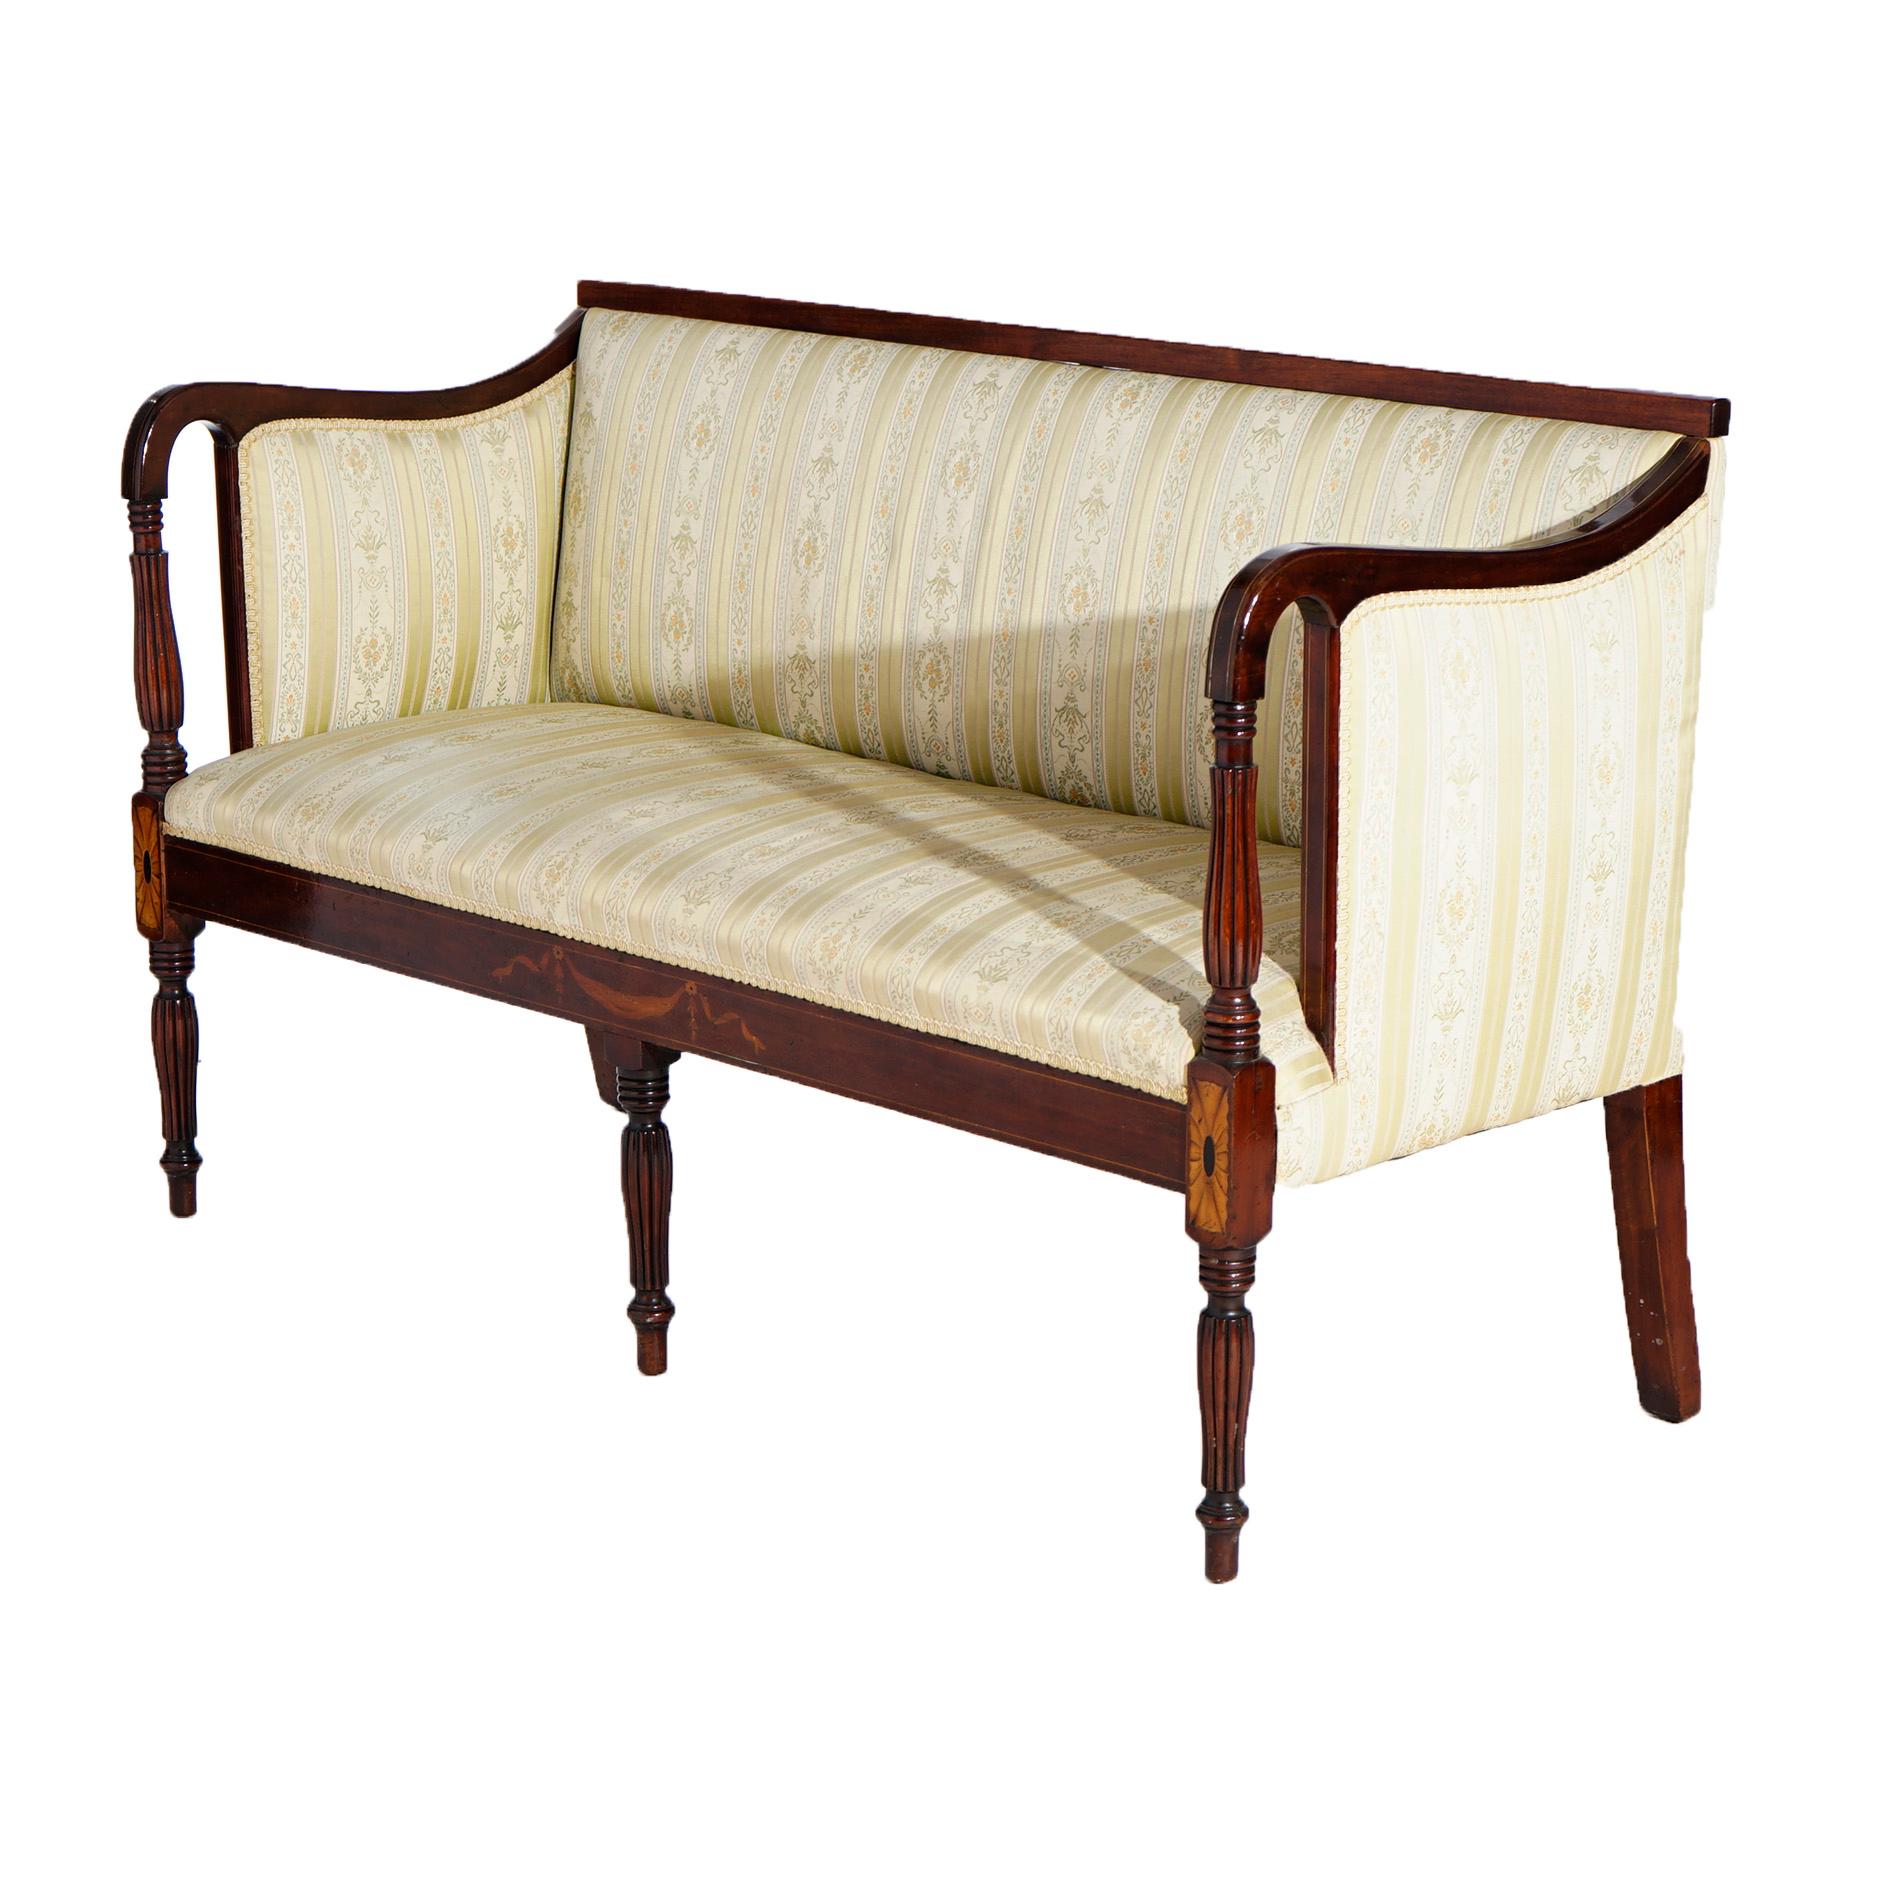 American Antique Sheraton Upholstered Mahogany Settee with Satinwood Swag Inlay 19th C